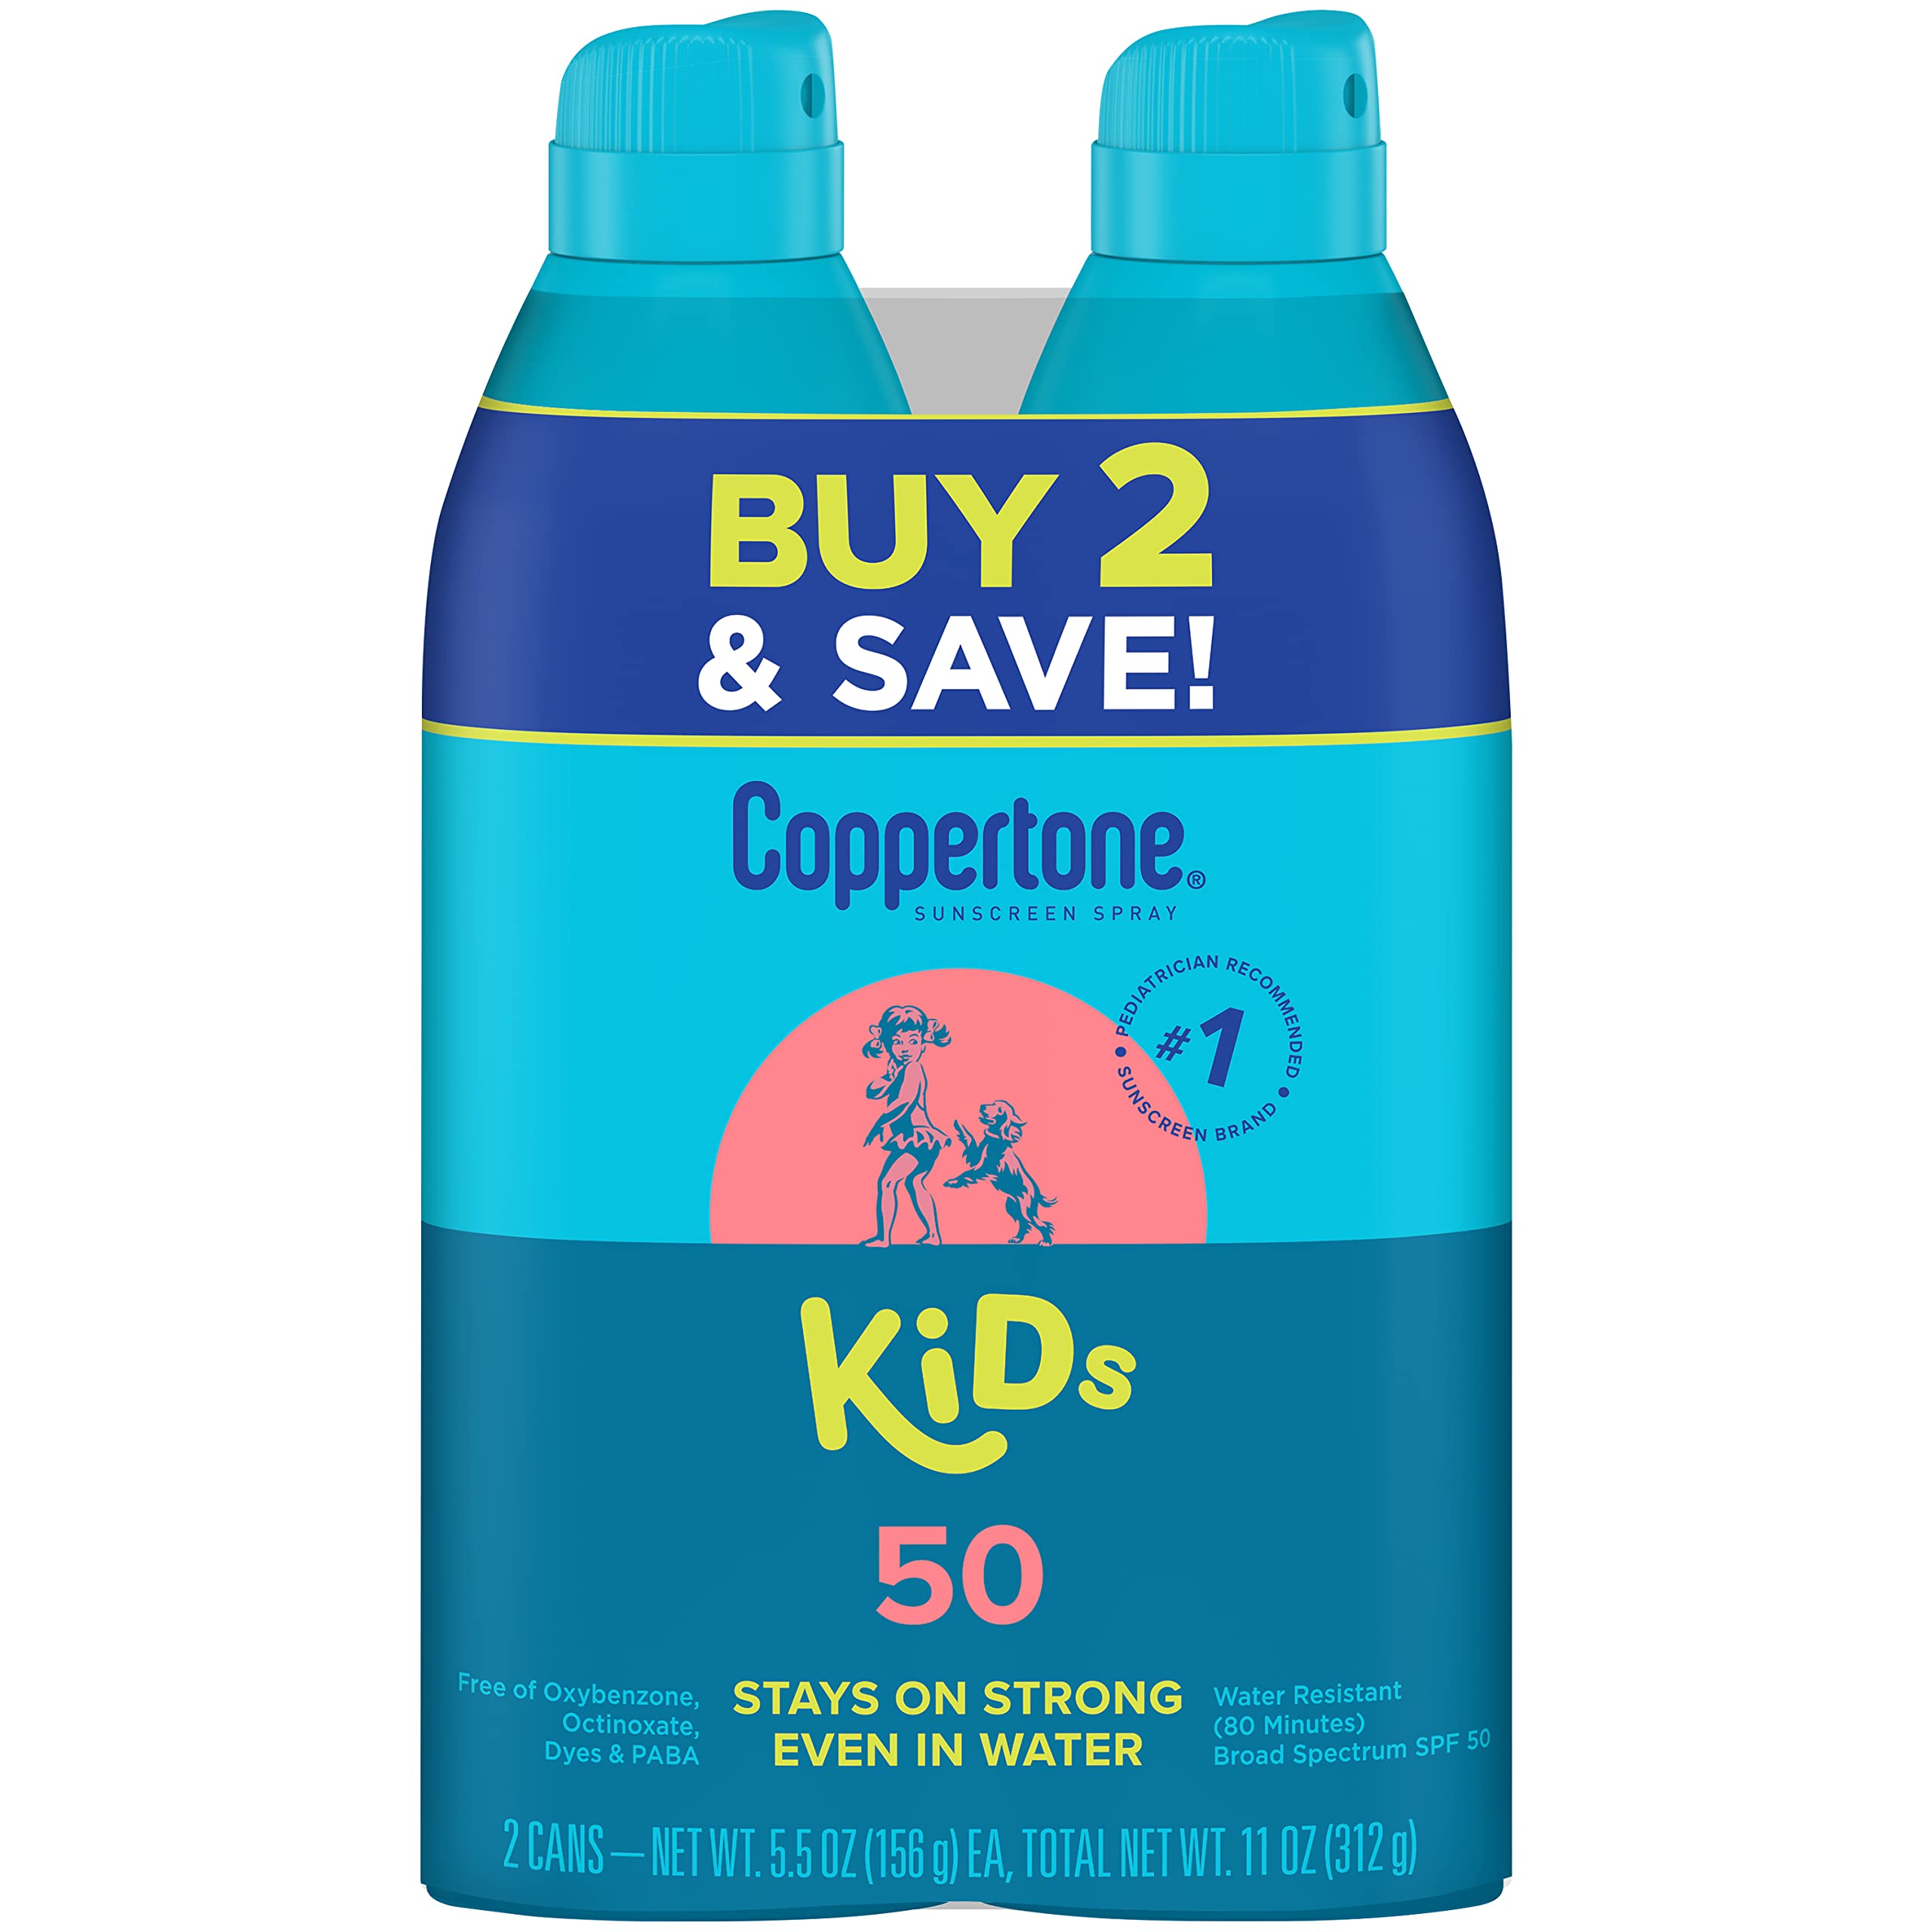 Coppertone Kids Sunscreen Spray SPF 50, Water Resistant Spray Sunscreen for Kids, #1 Pediatrician Recommended Sunscreen Brand, Broad Spectrum SPF 50 Sunscreen Pack, 5.5 Ounce (Pack of 2)